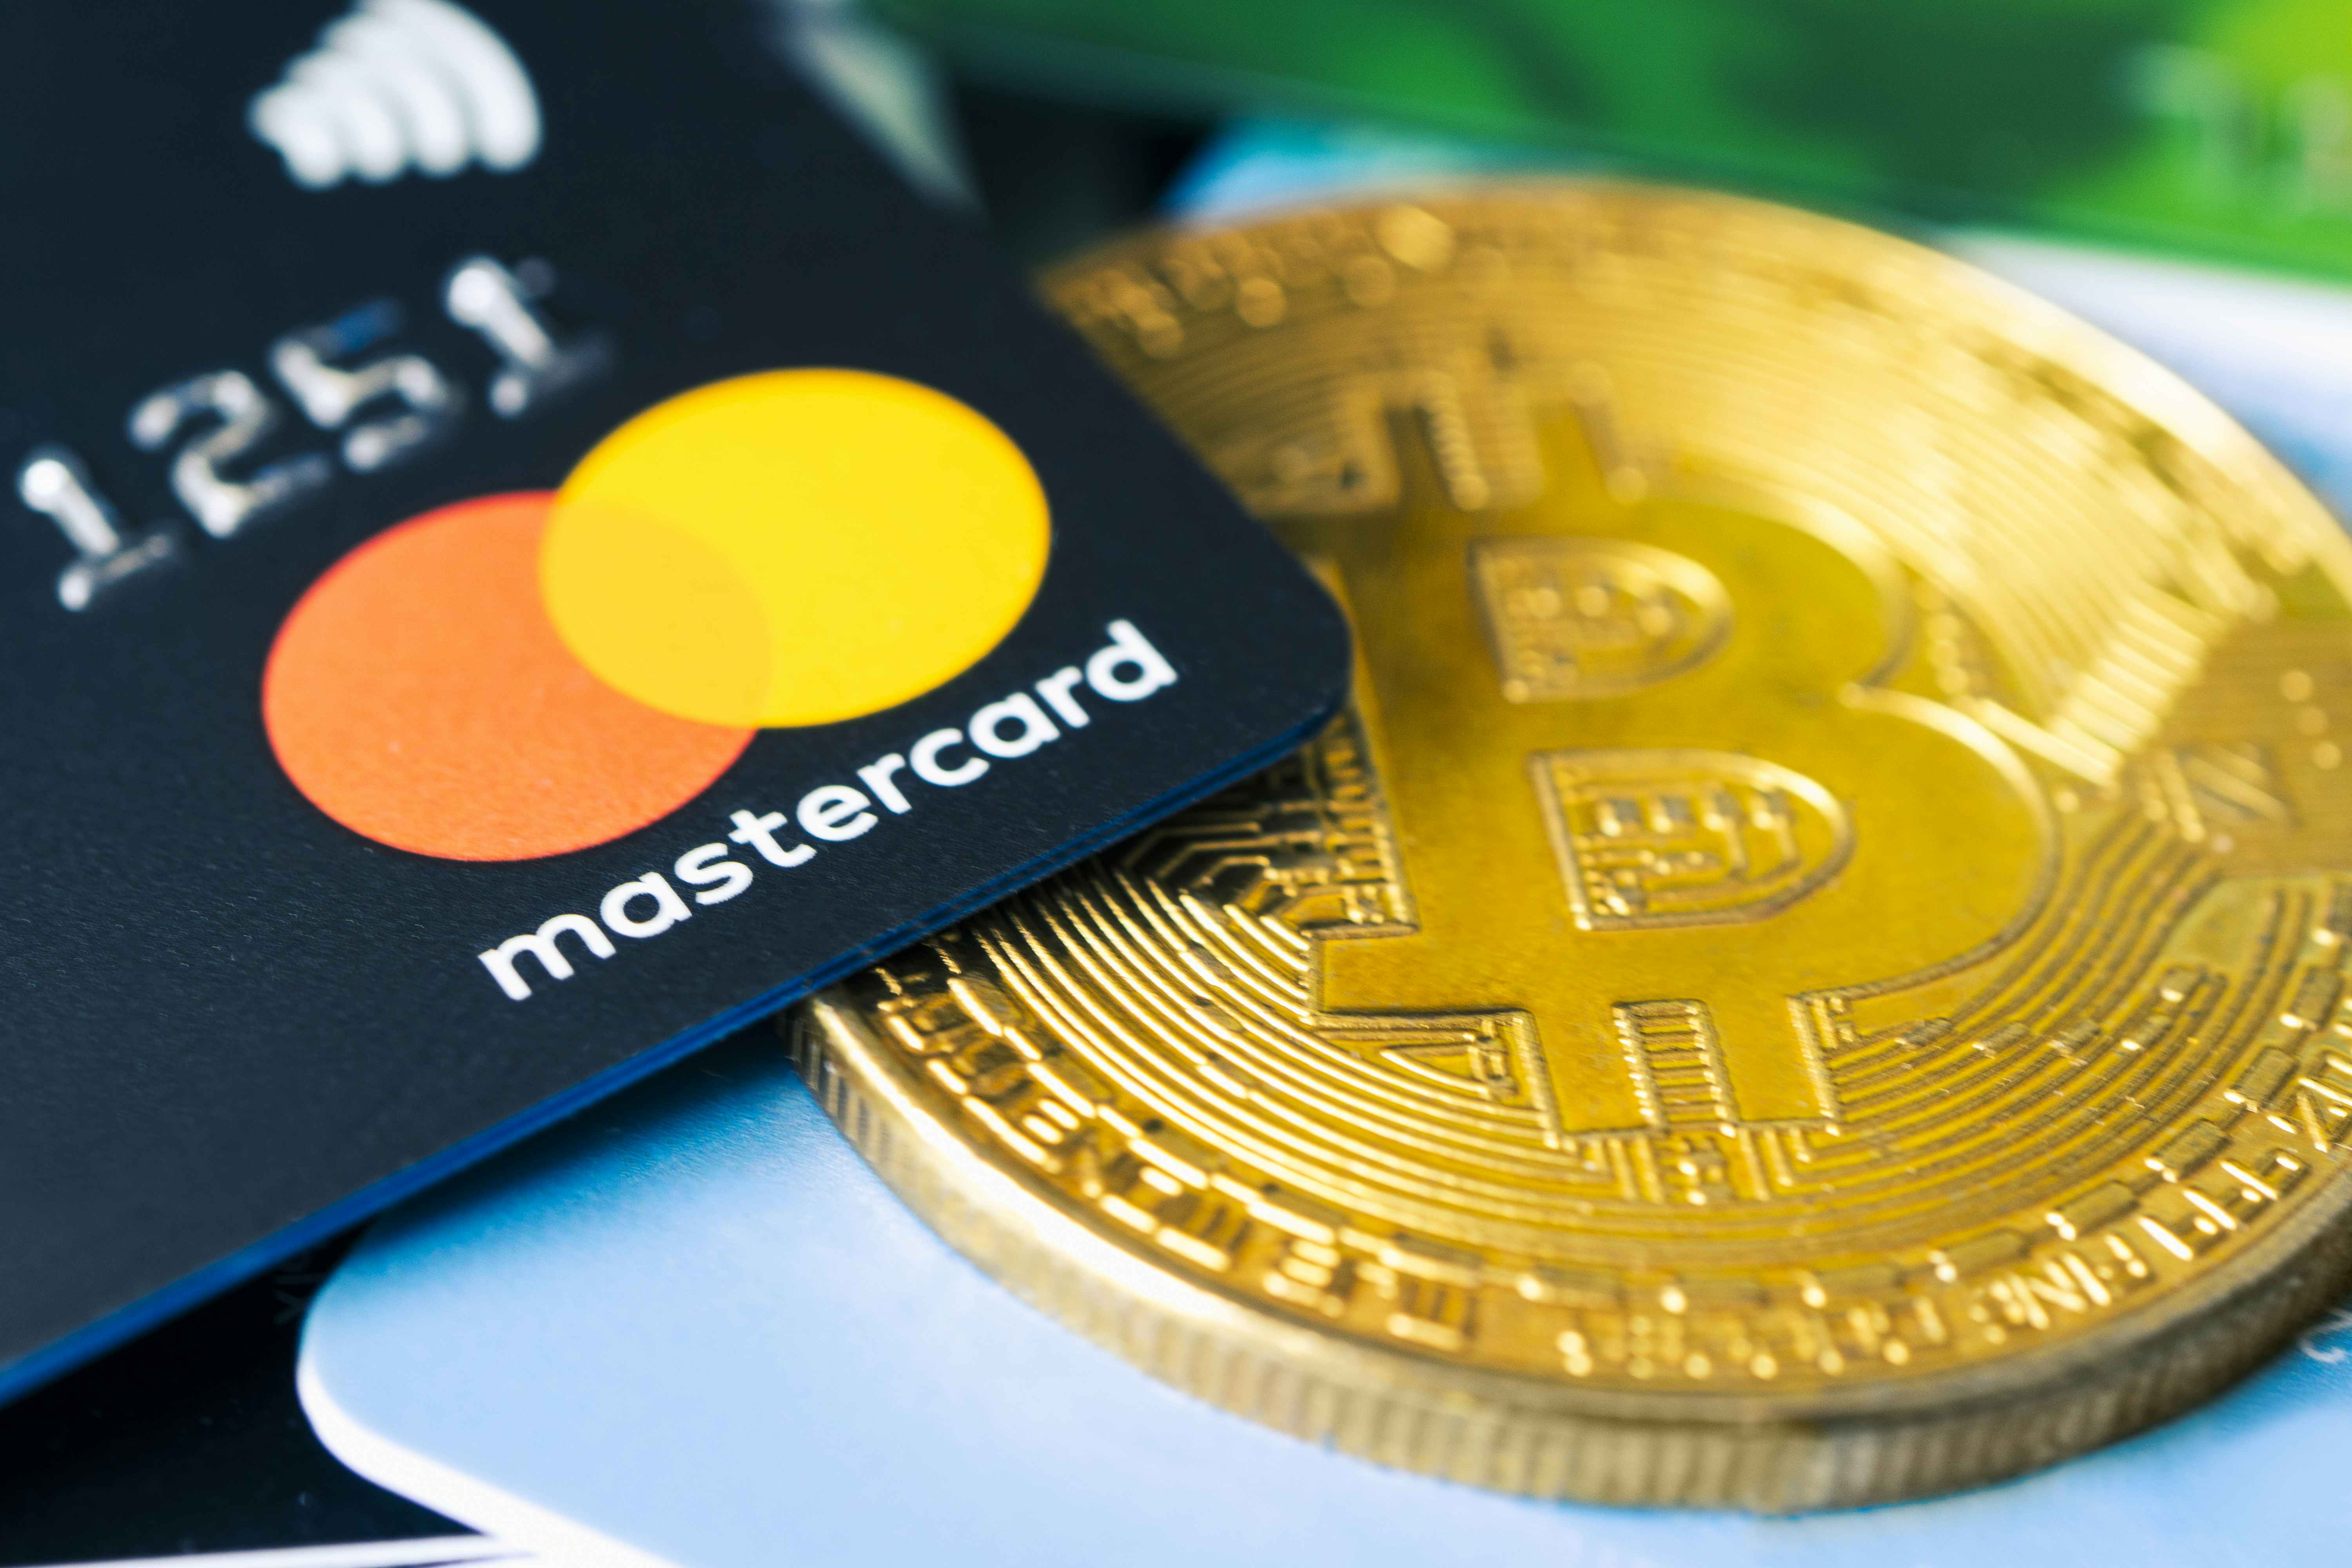 mastercard is sitting on top of a bitcoin